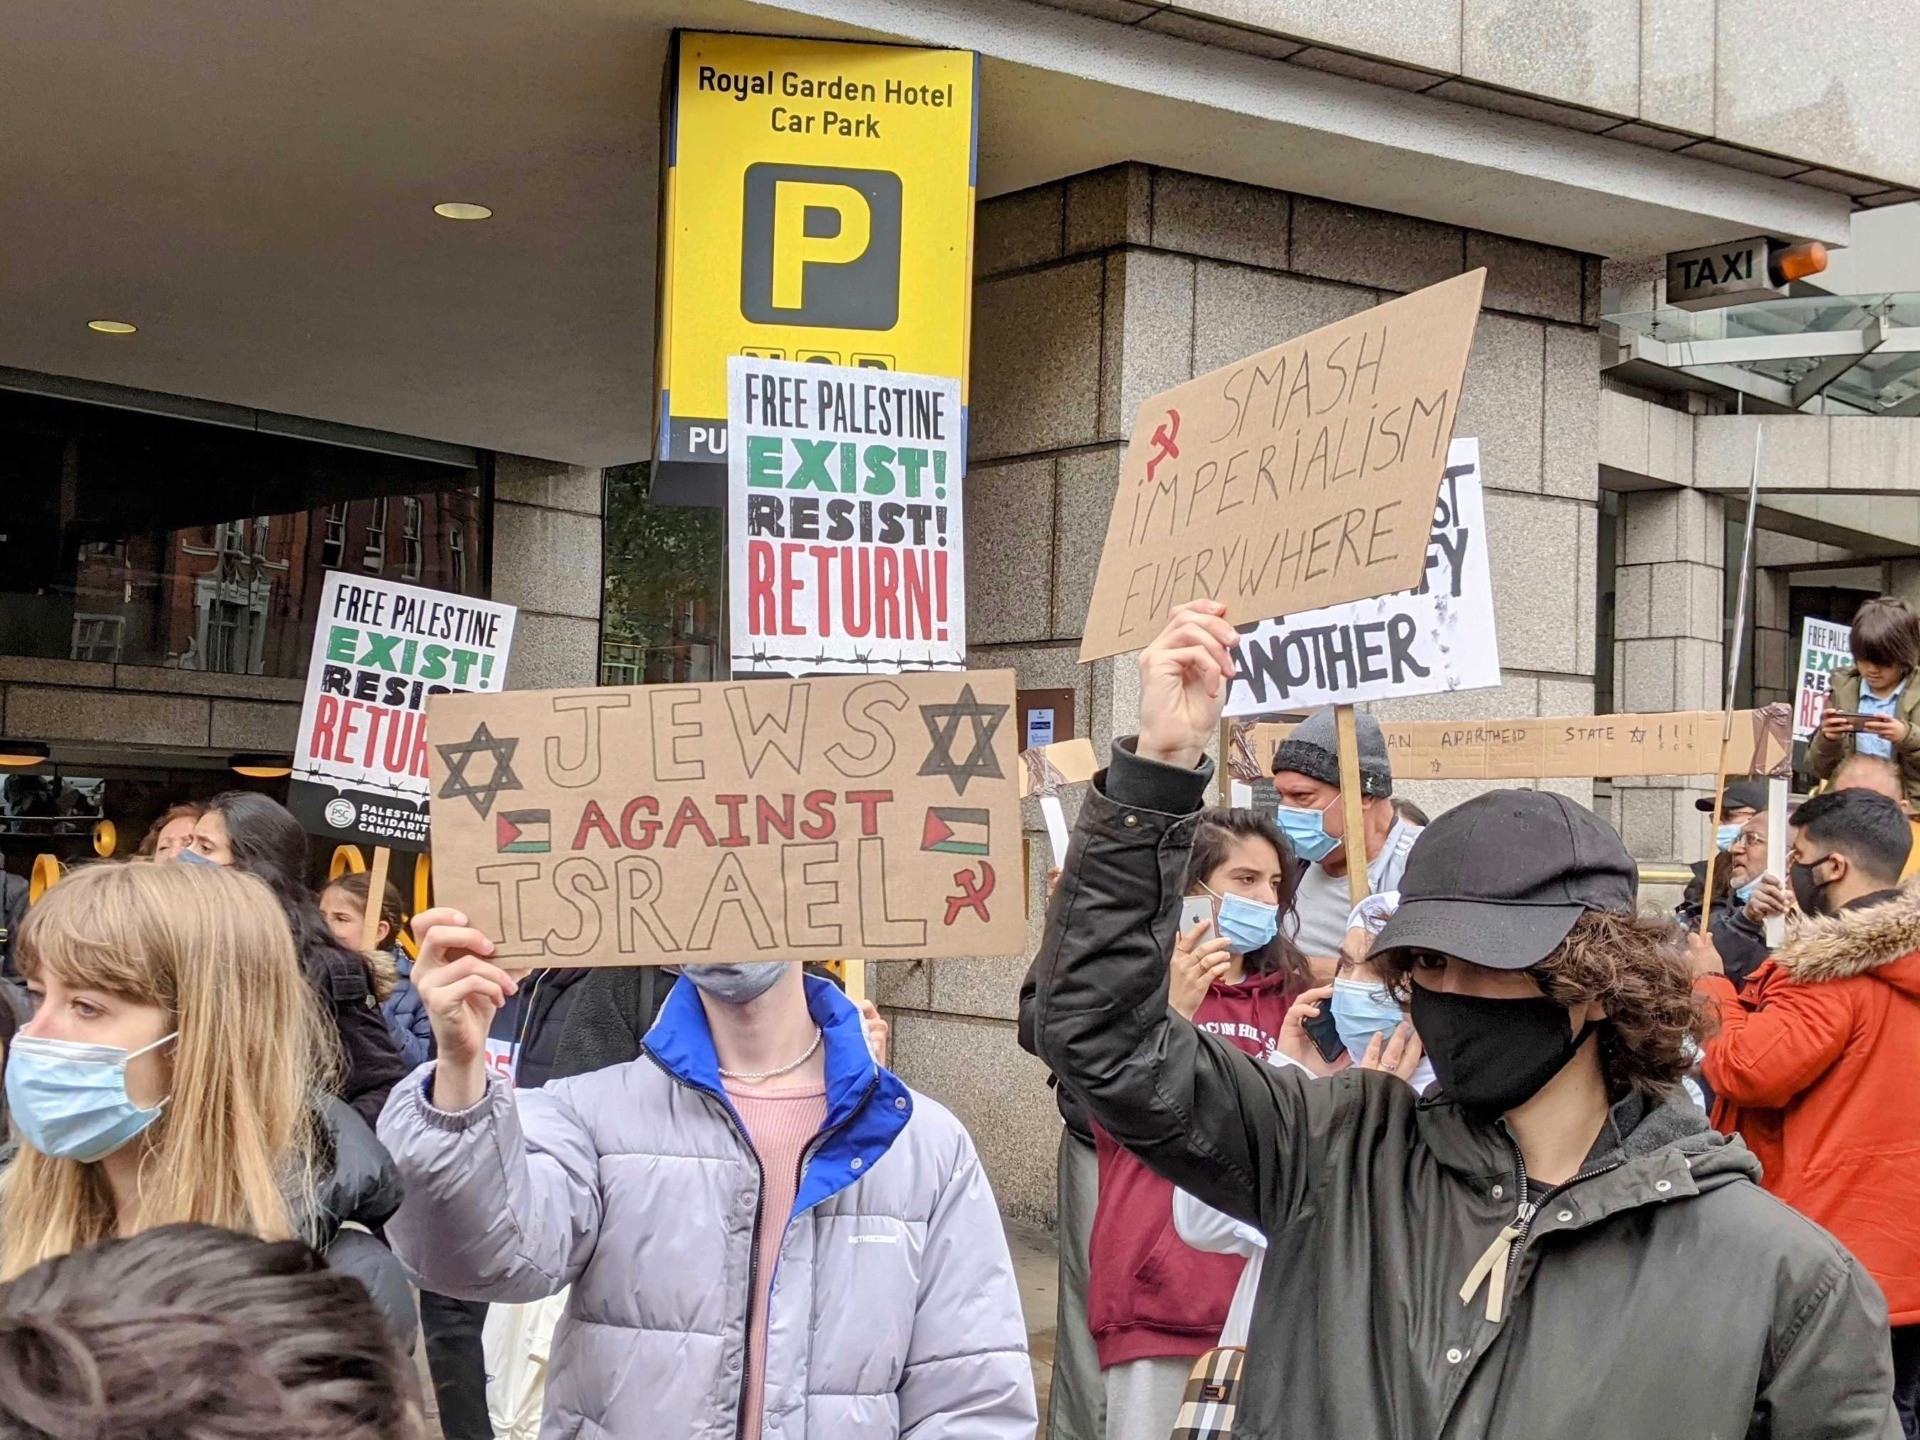 Protesters are seen carrying placards reading "Jews Against Israel" and "Smash Impearialism Everywhere, at an anti-Israel protest in London. May 15th, 2021. Kurt Zindulka, Breitbart News